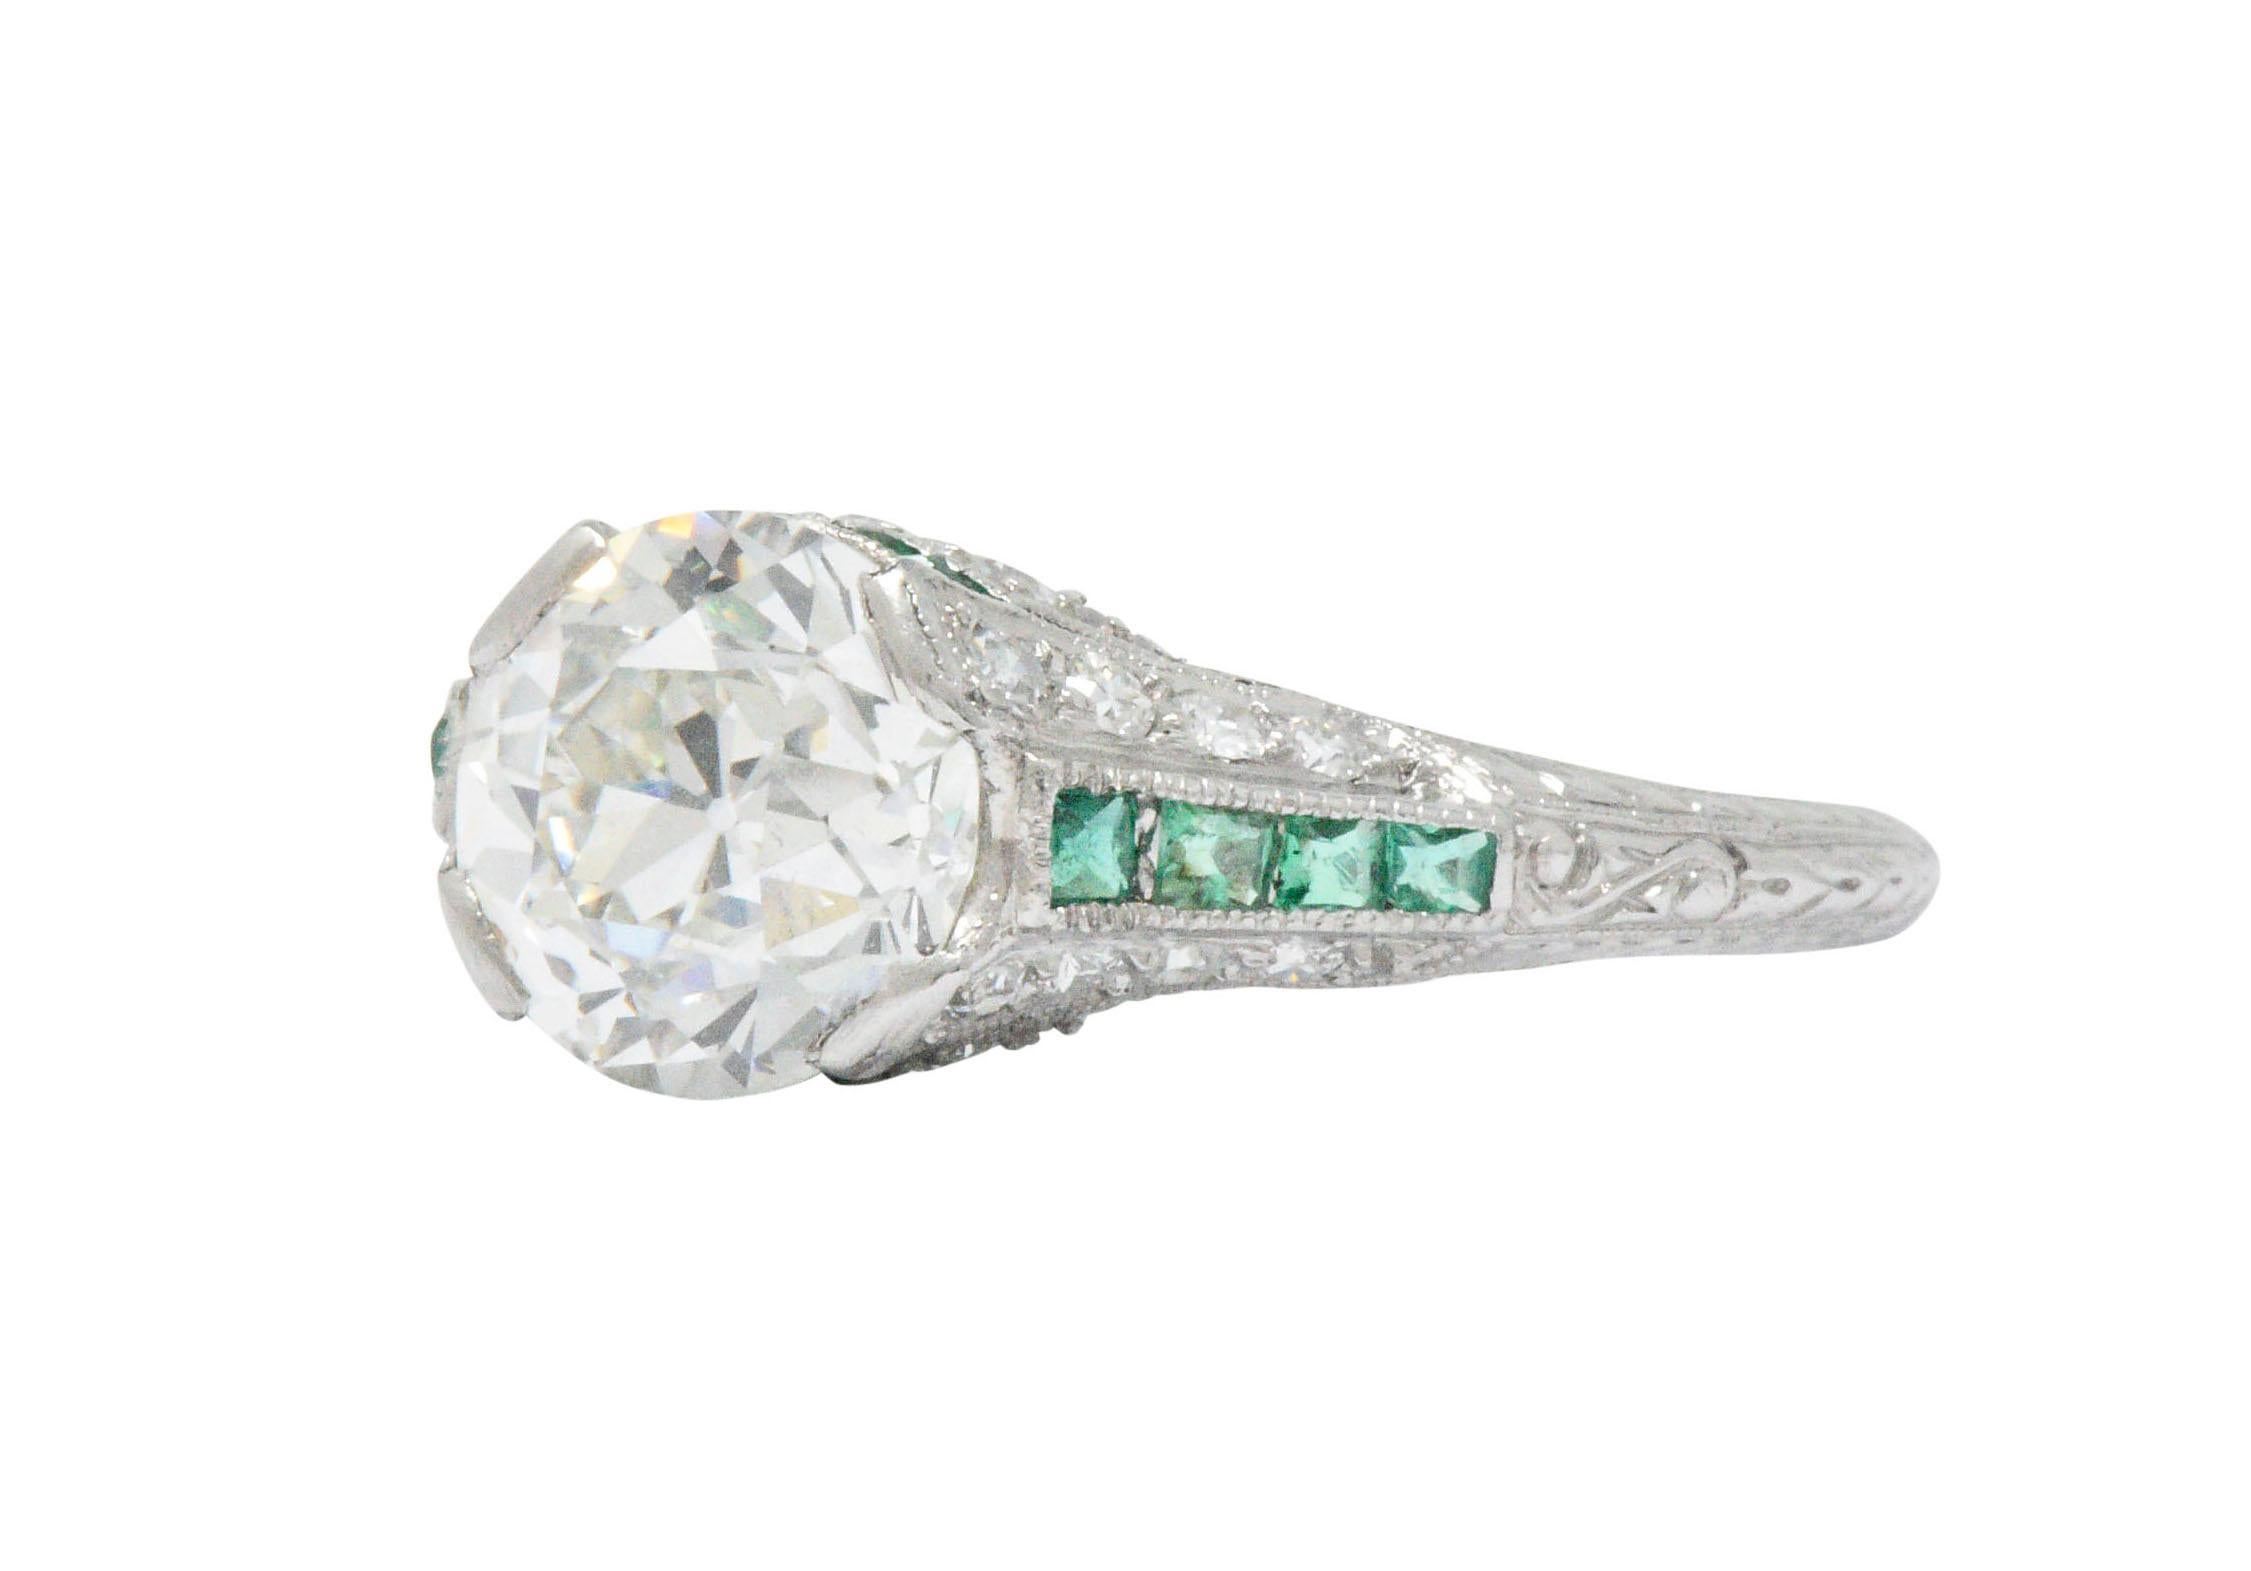 Centering an old European cut diamond weighing 2.05 carats, I color and VS1 clarity, set low in mounting by wide prongs

Channel set at each cardinal point by square cut emeralds weighing approximately 0.35 carat; translucent and verdant green in